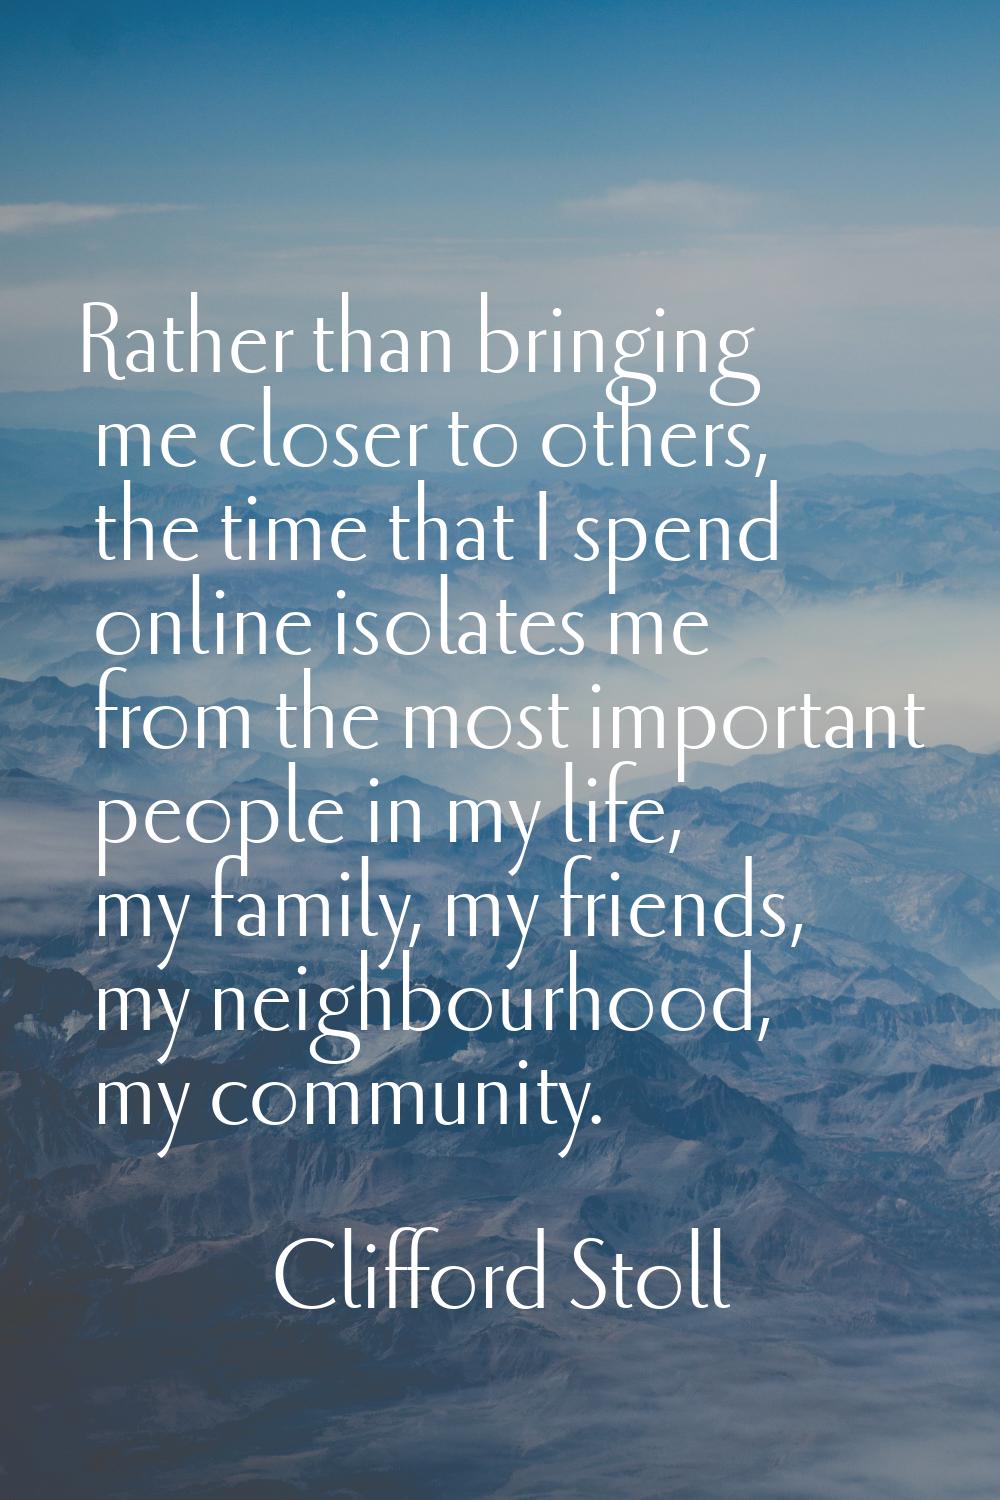 Rather than bringing me closer to others, the time that I spend online isolates me from the most im